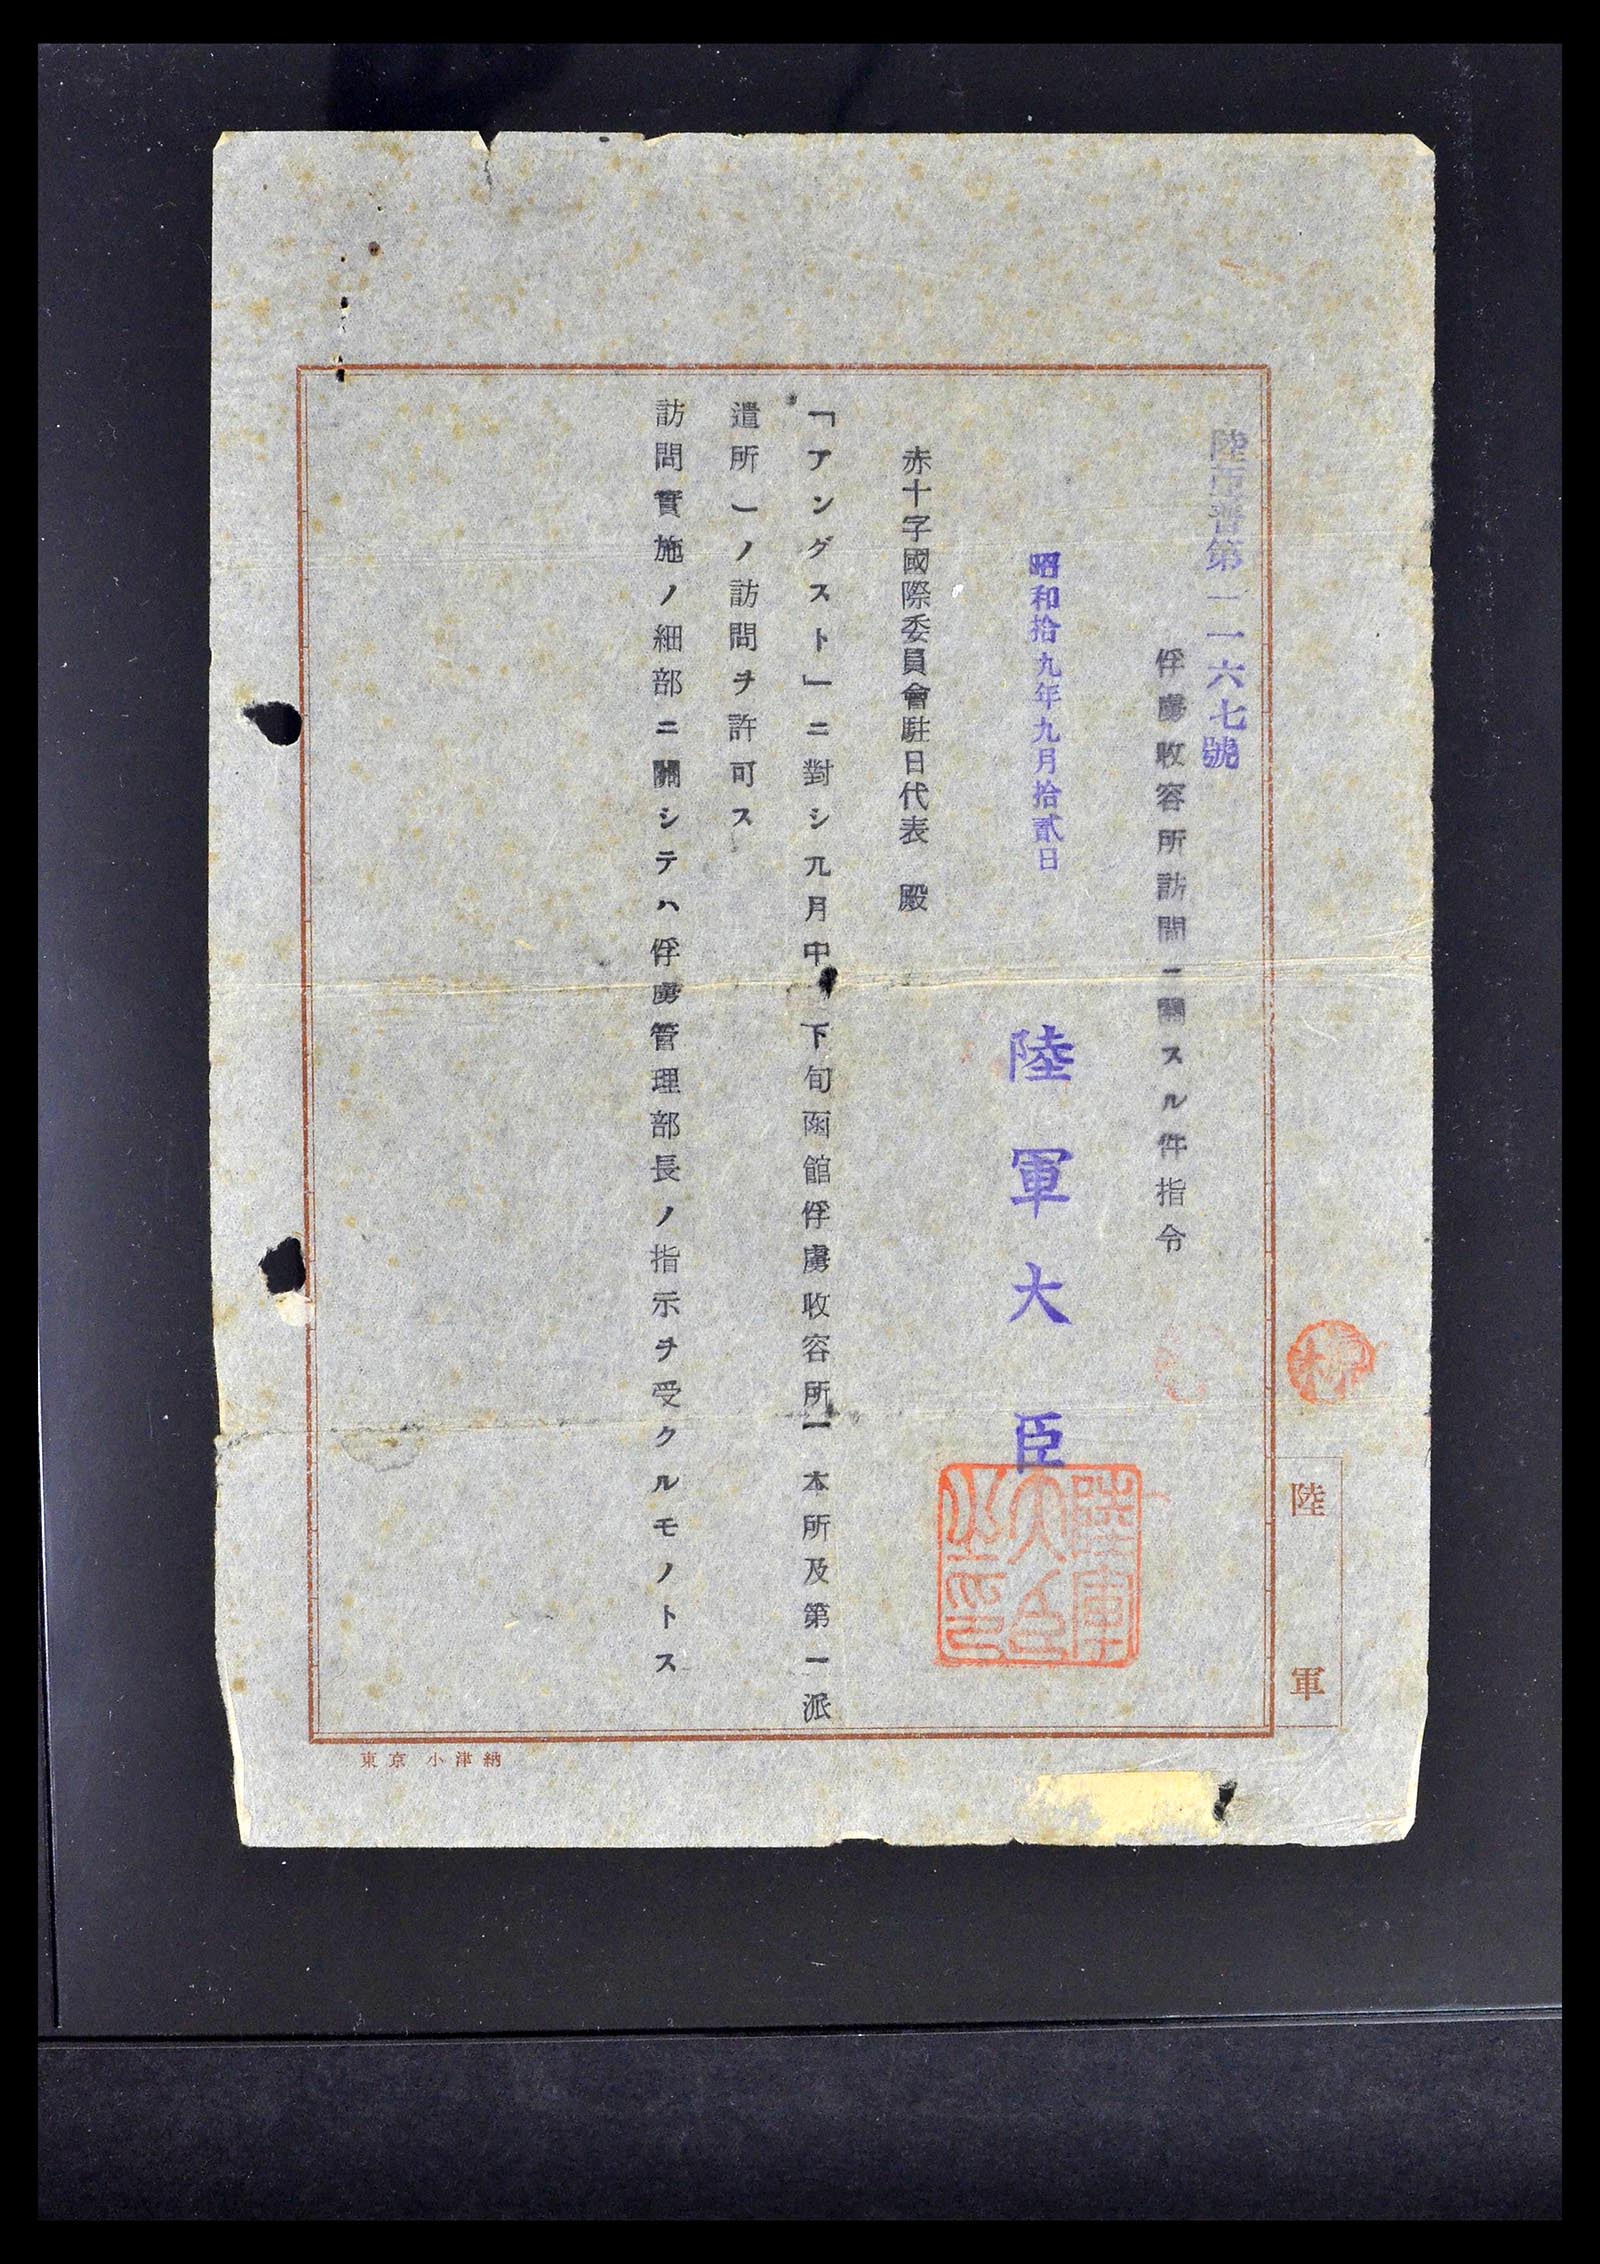 39168 0014 - Stamp collection 39168 Japan WW II 1943-1945.